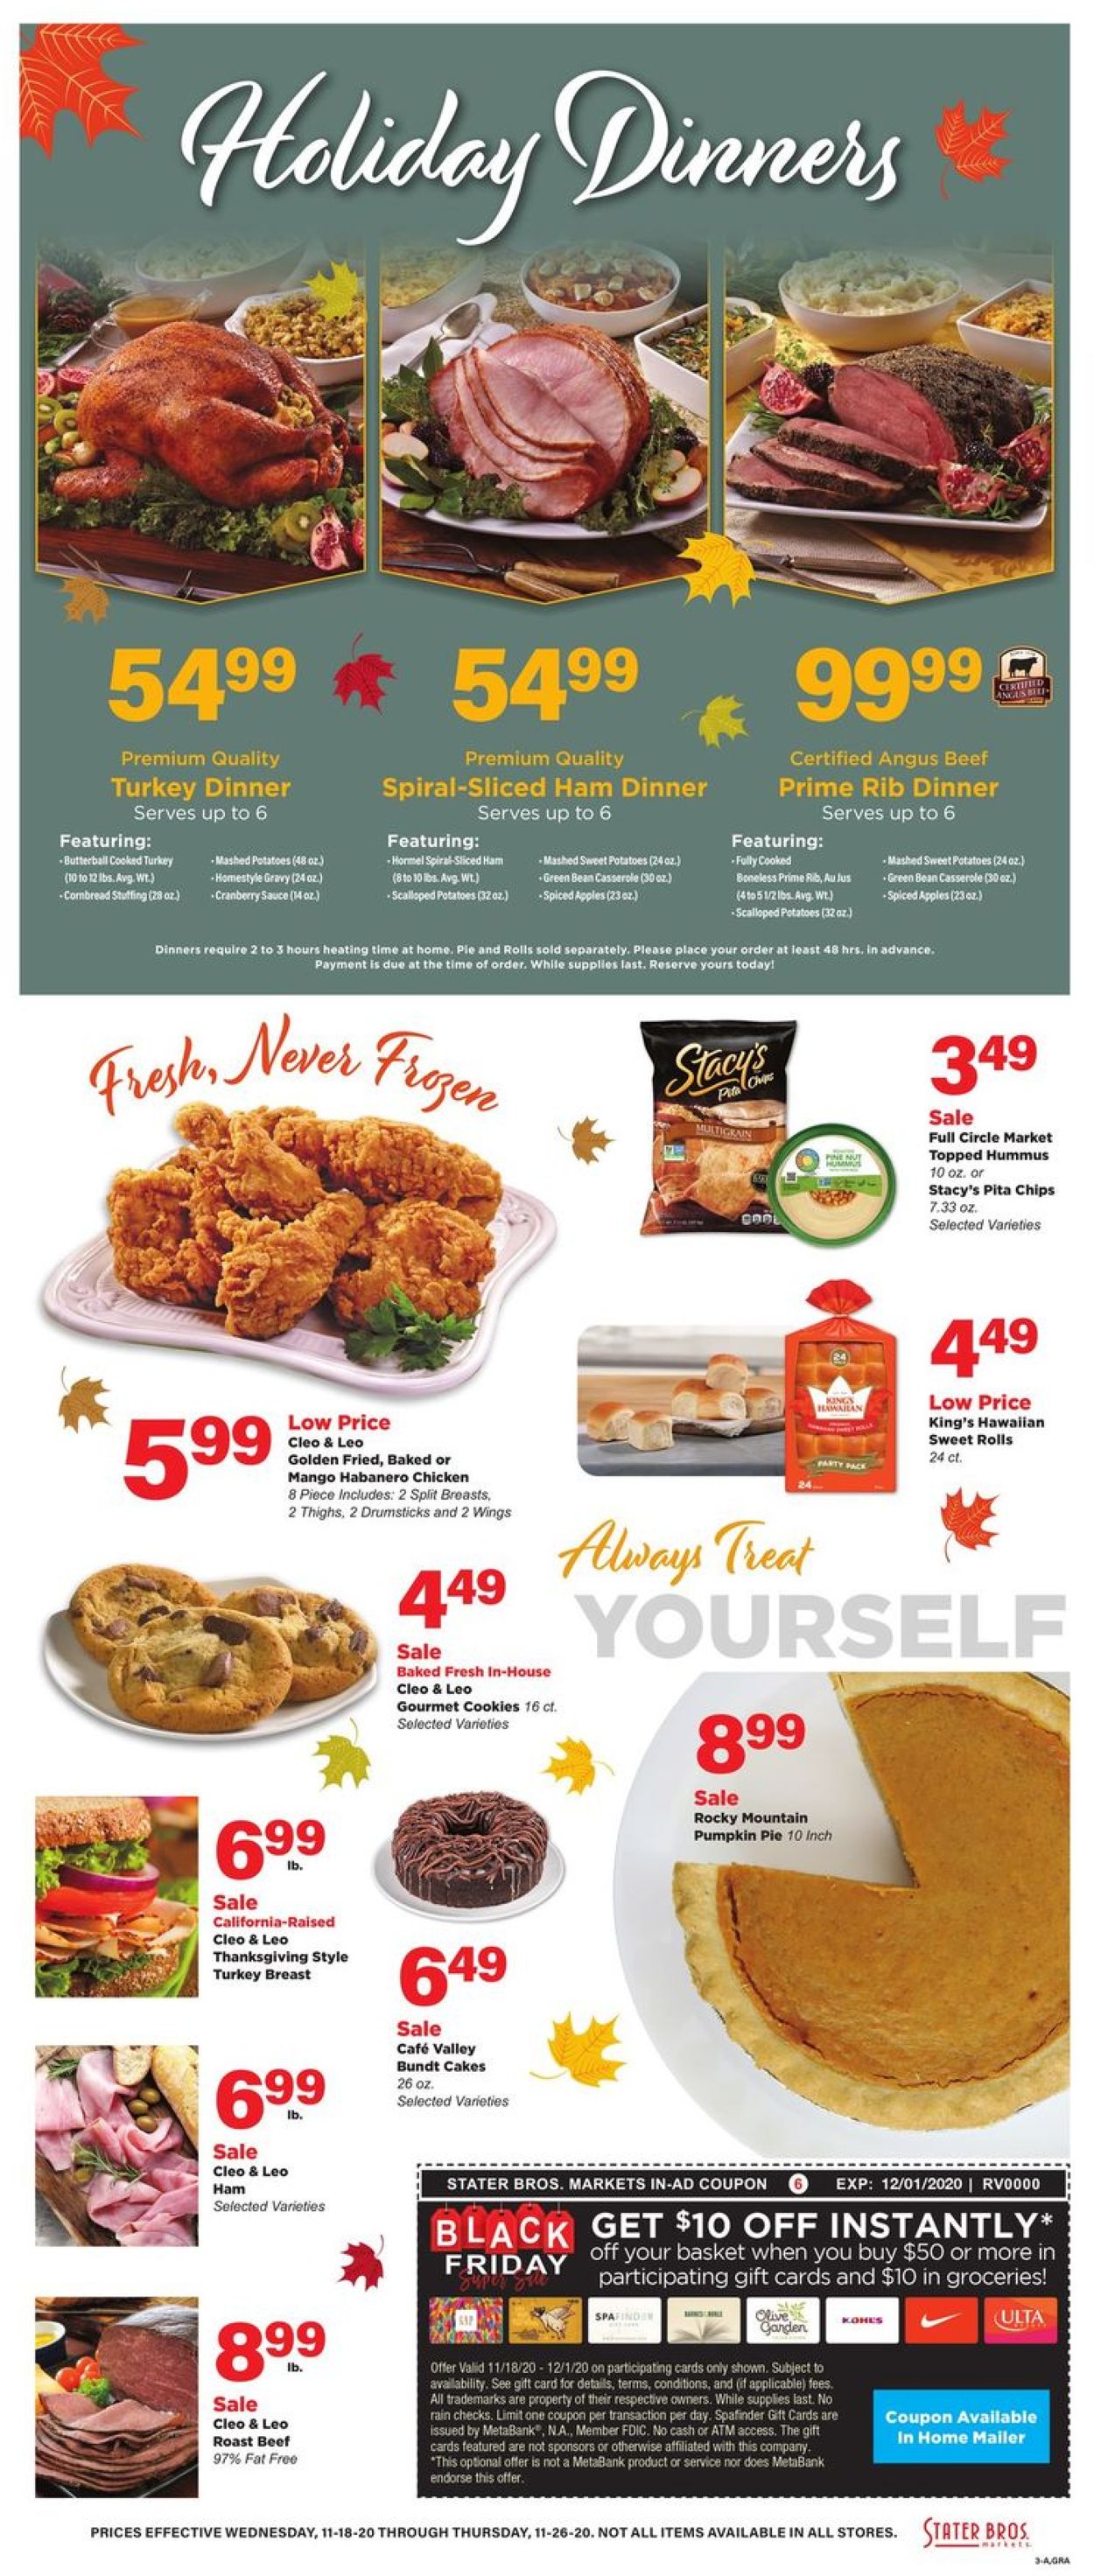 Stater Bros. Thanksgiving ad 2020 Weekly Ad Circular - valid 11/18-11/26/2020 (Page 3)